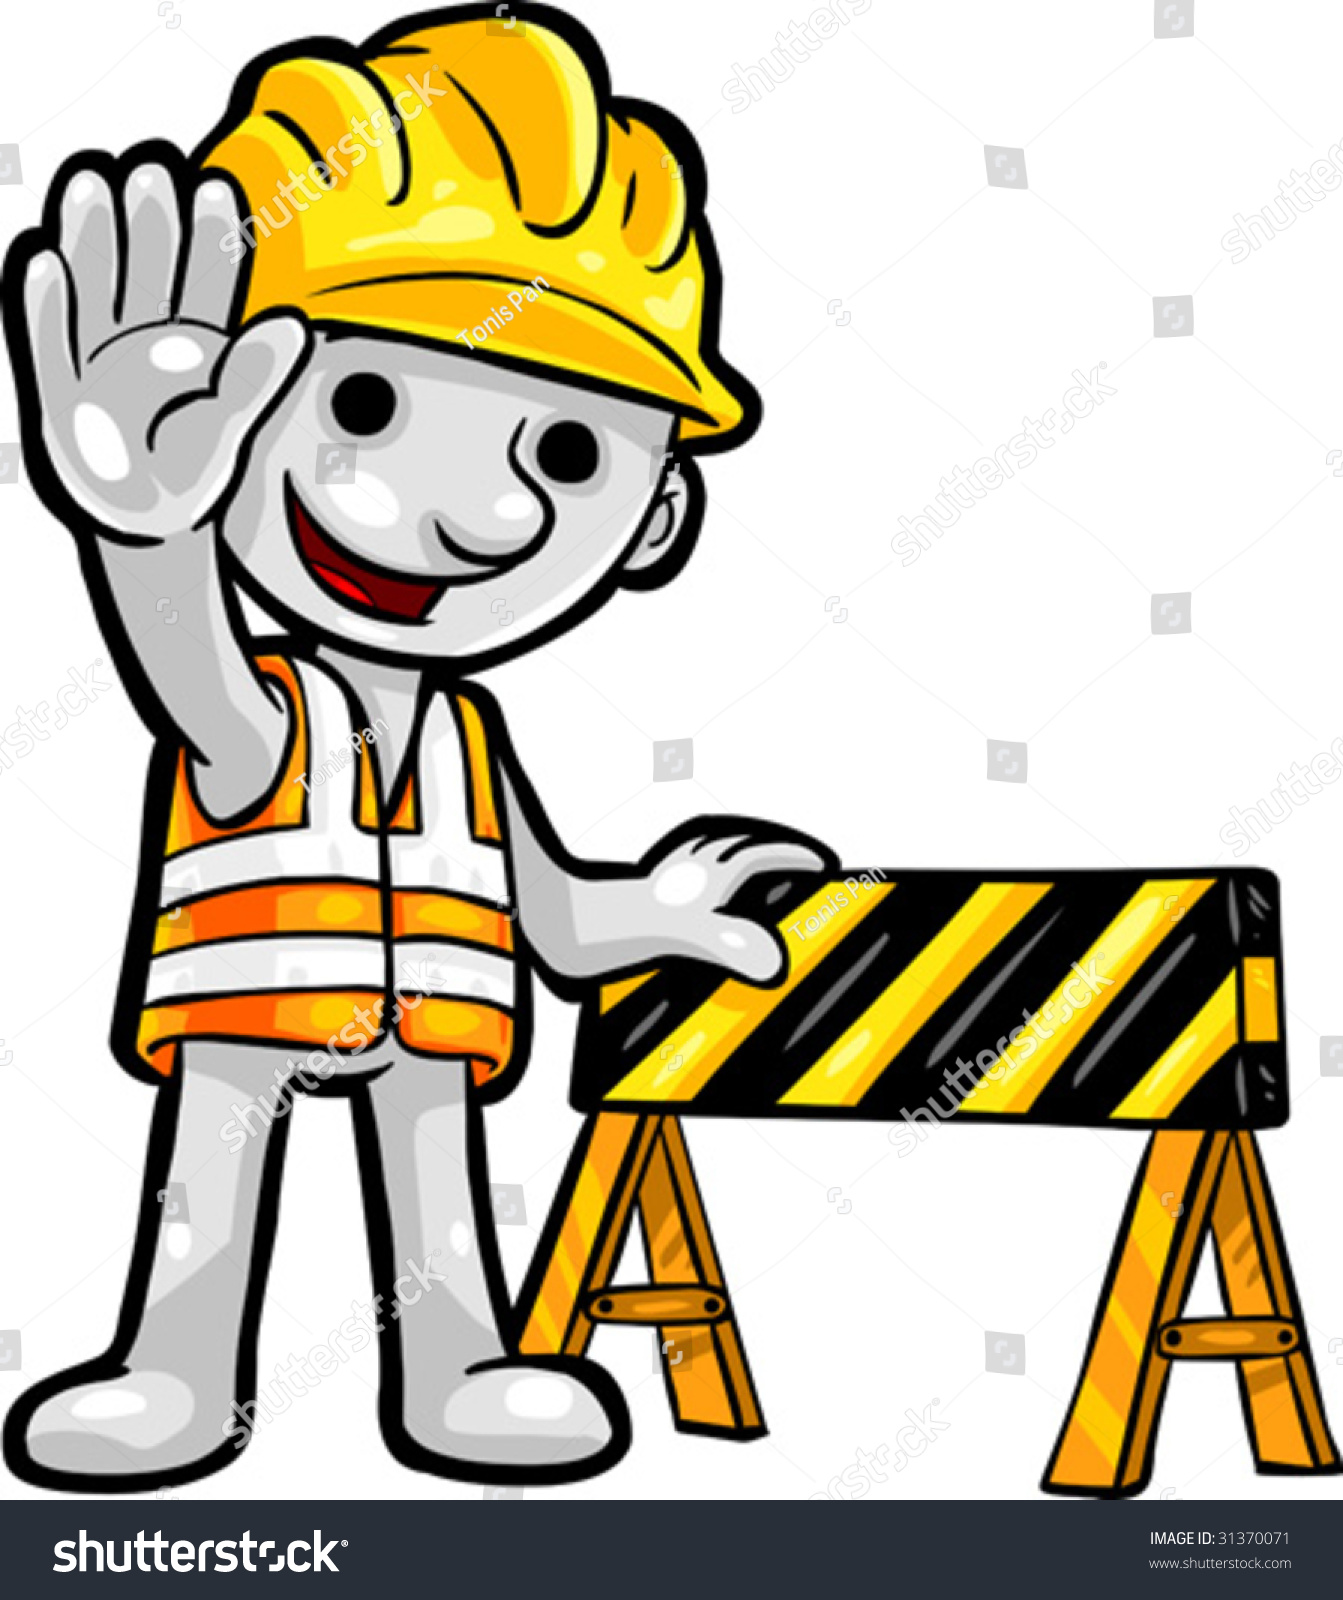 construction clipart collection - photo #25